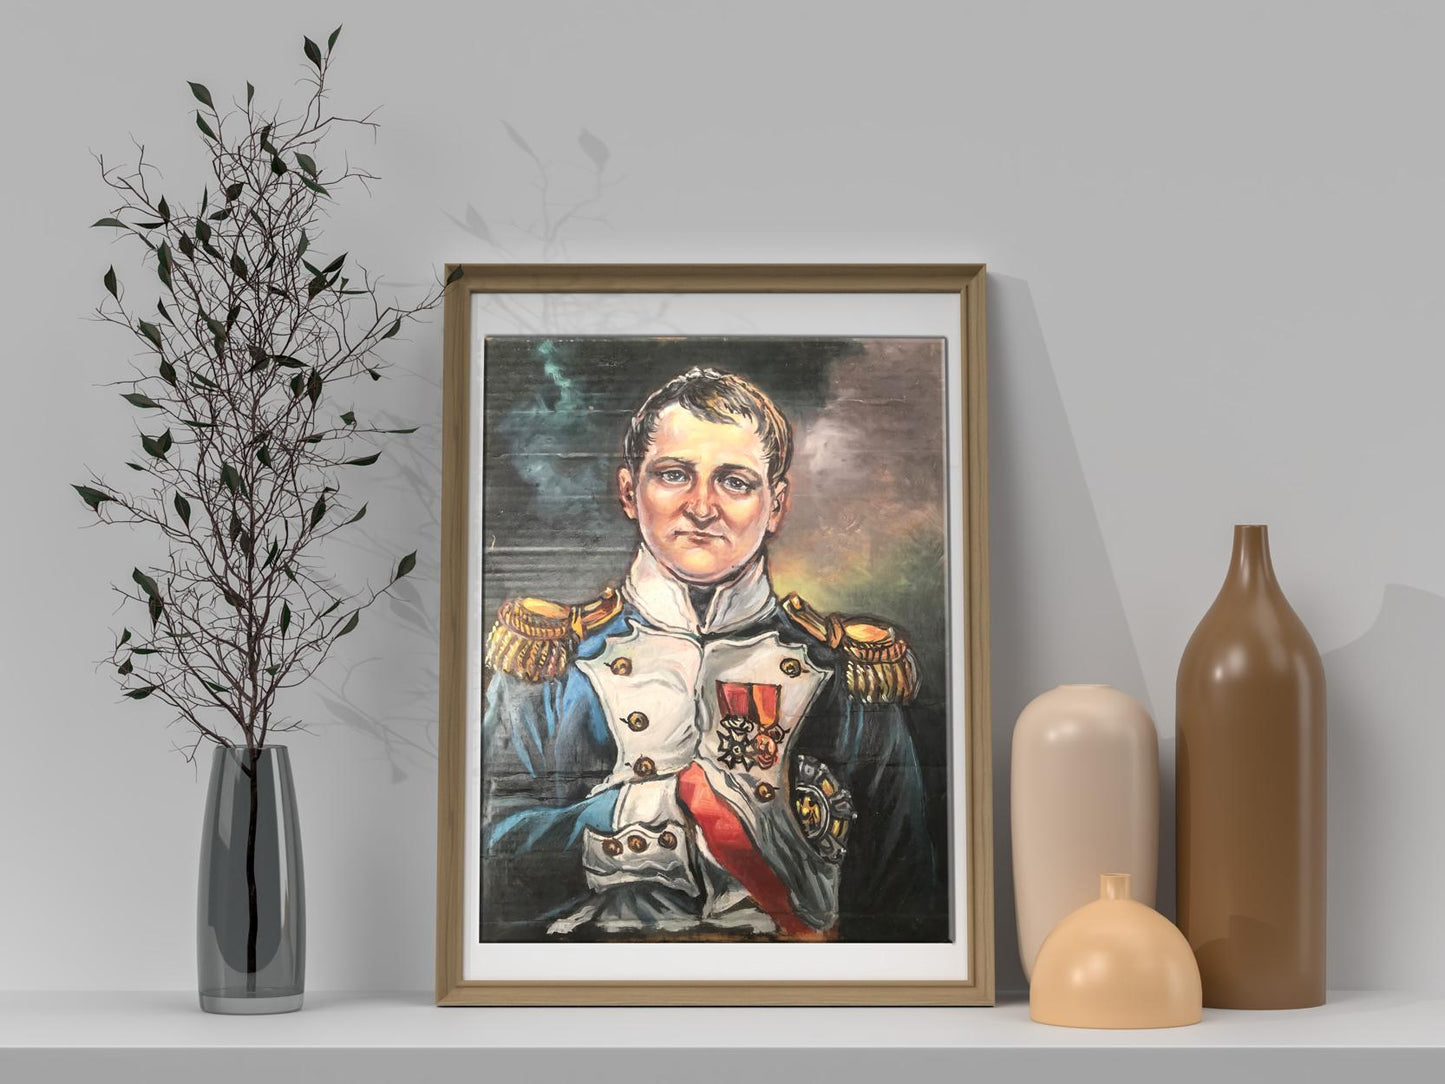 Alexander Litvinov presents an oil painting depicting a military portrait of Napoleon